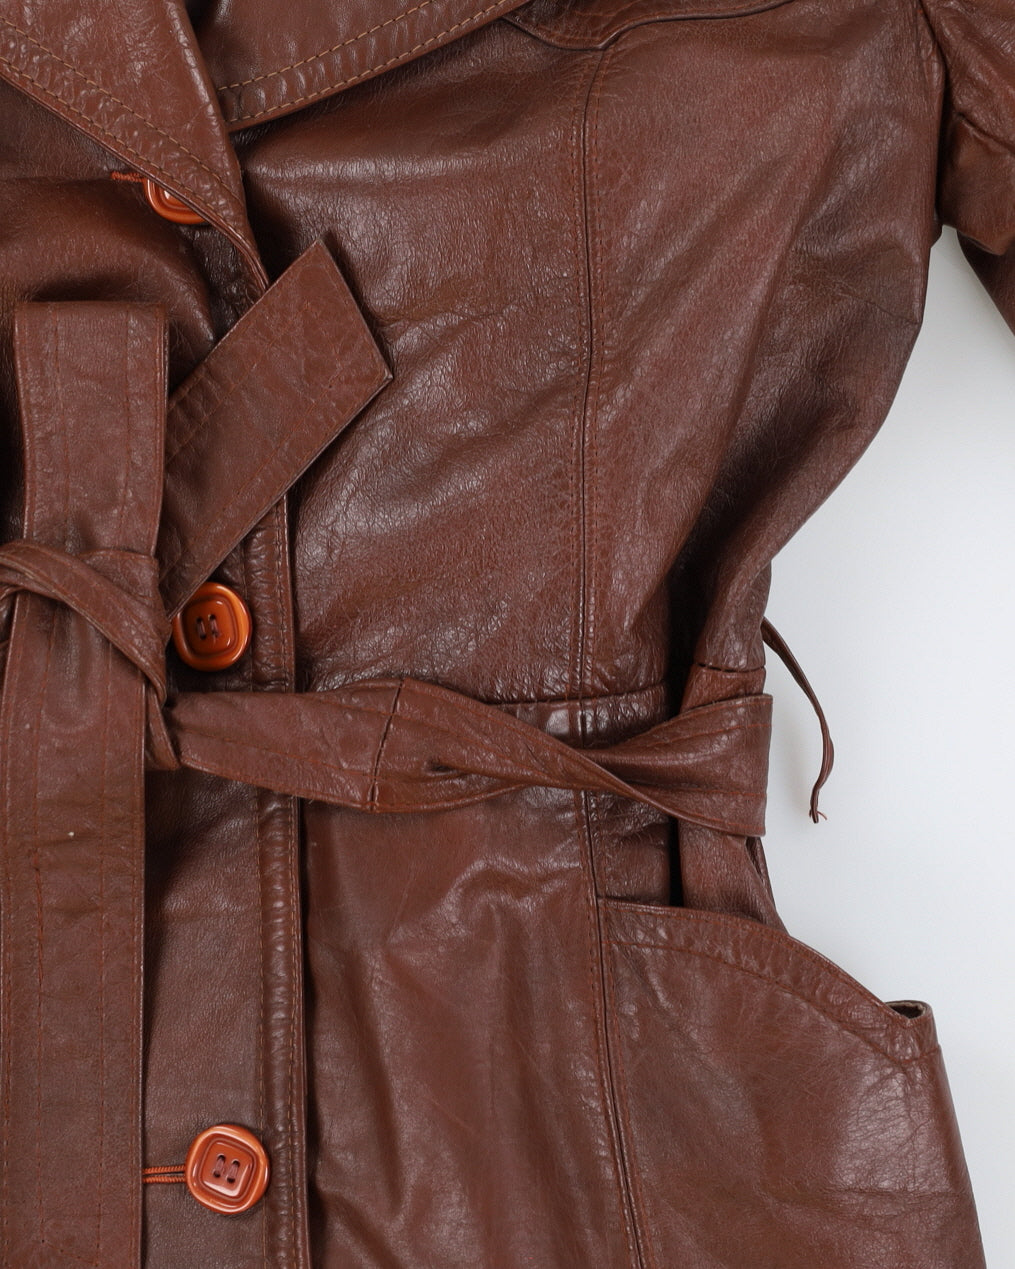 Vintage 70s Women's Brown Leather Jacket With Belt - S